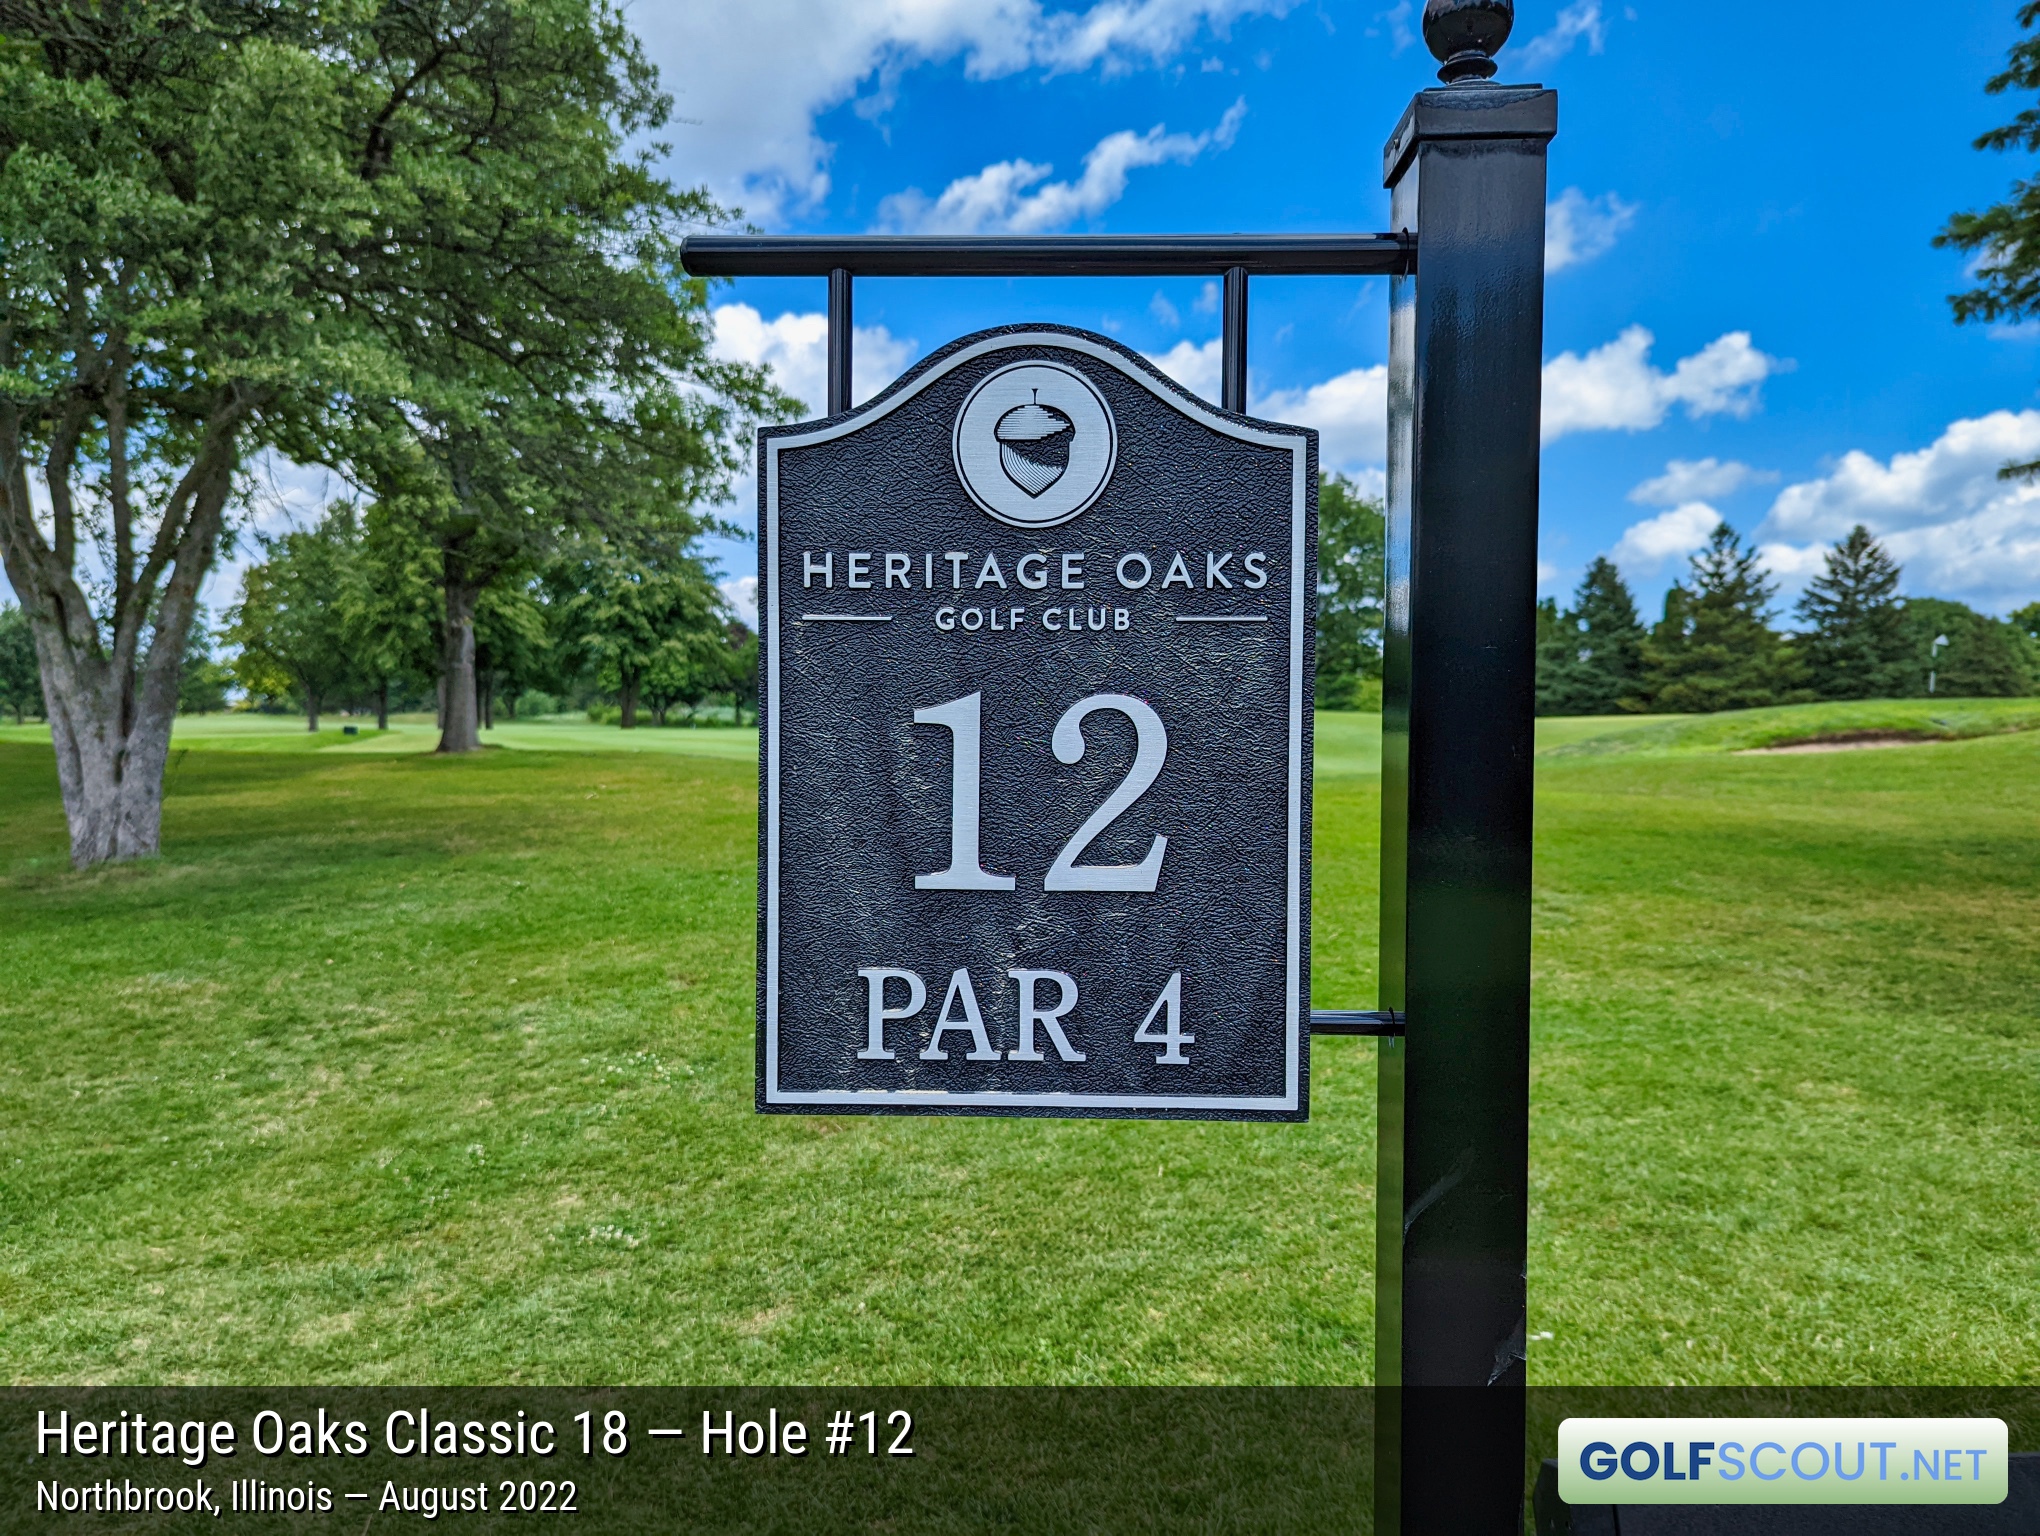 Photo of hole #12 at Heritage Oaks Golf Club - Classic 18 in Northbrook, Illinois. 